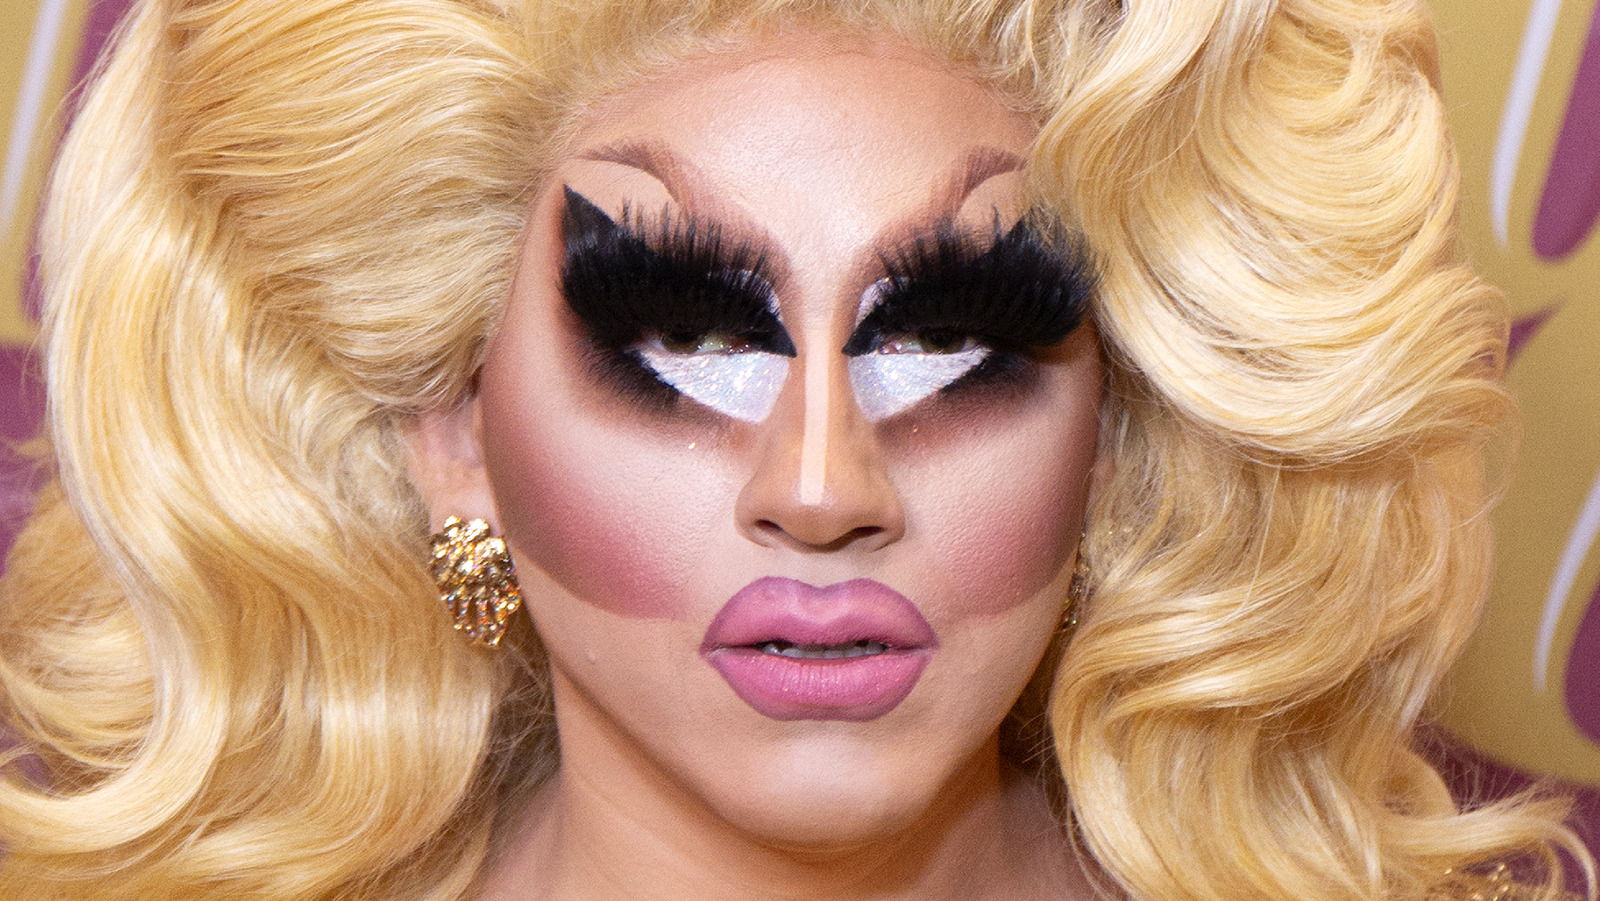 What To Know About Trixie Mattel's New Reality Show